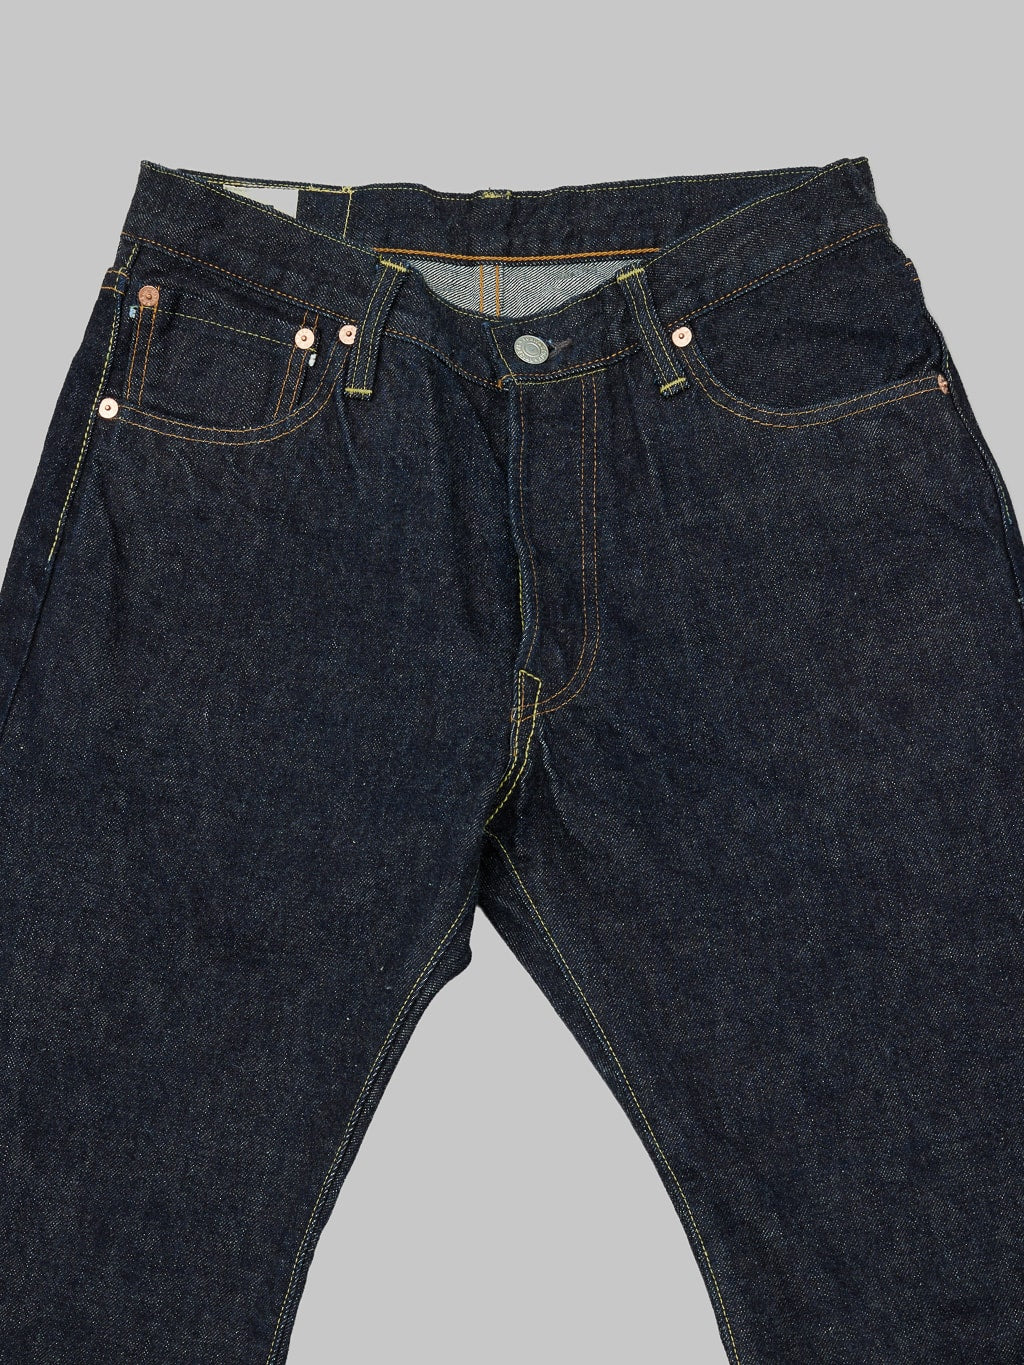 Fob factory slim straight denim jeans front view